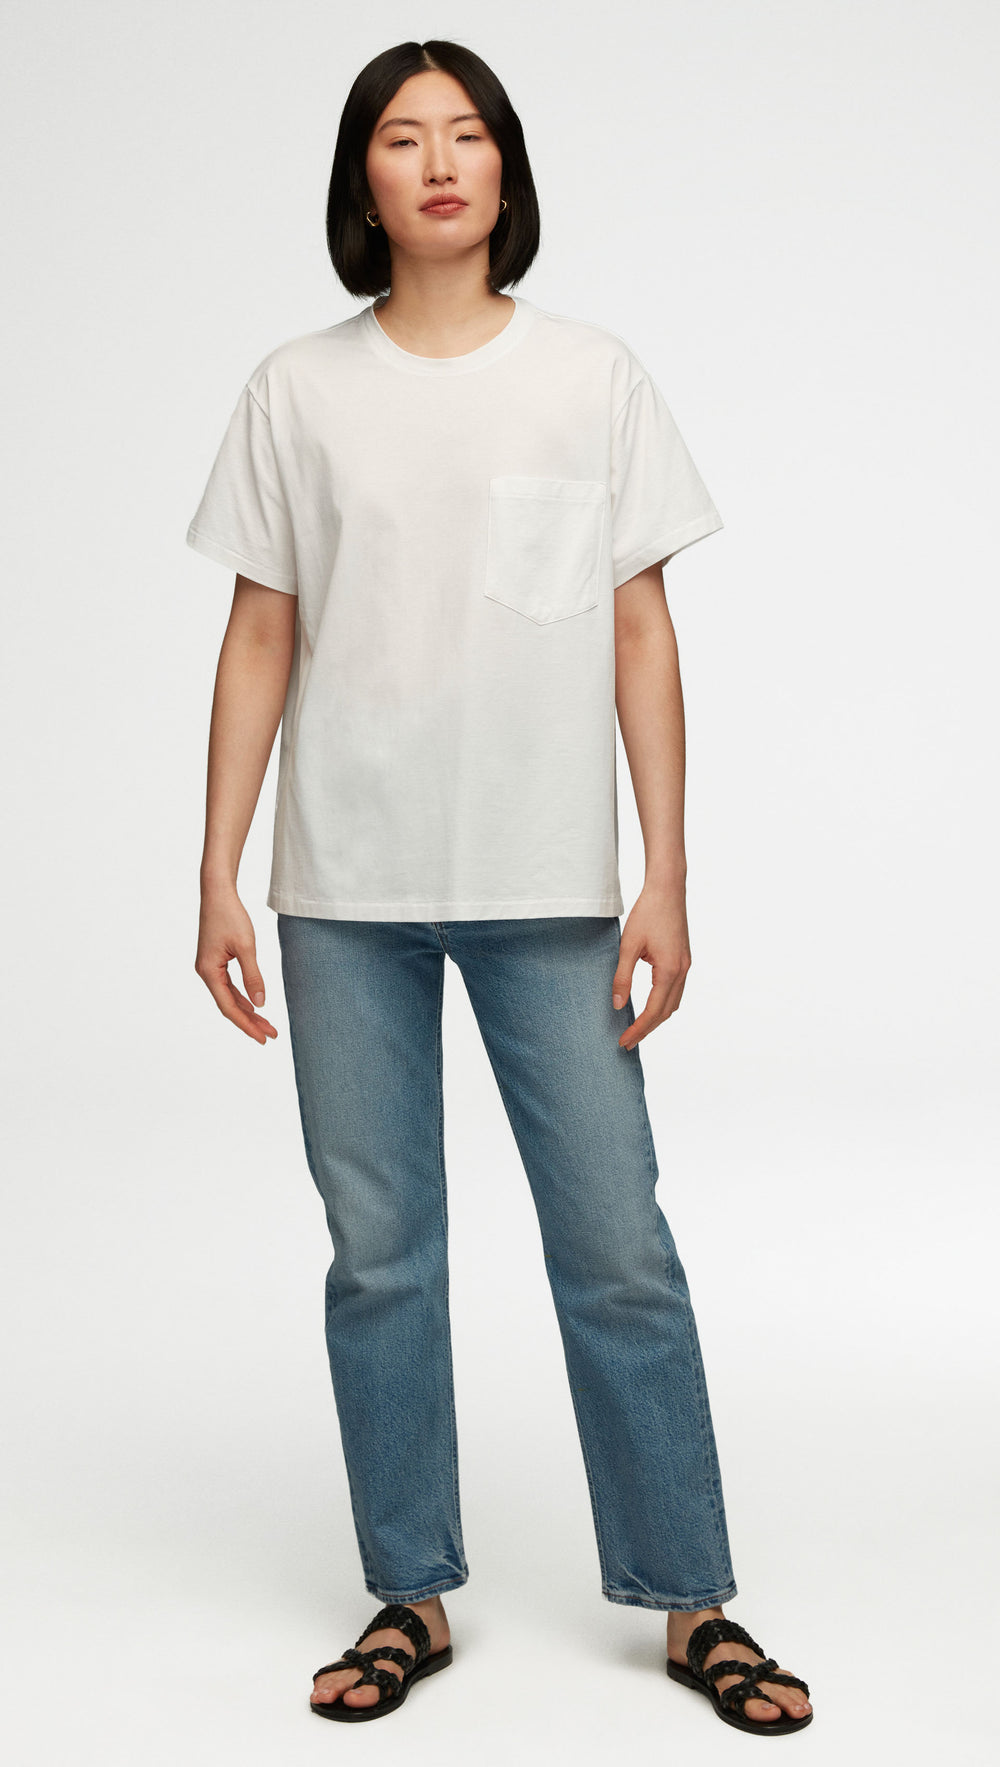 Oversized Pocket Tee in Cotton Jersey | White